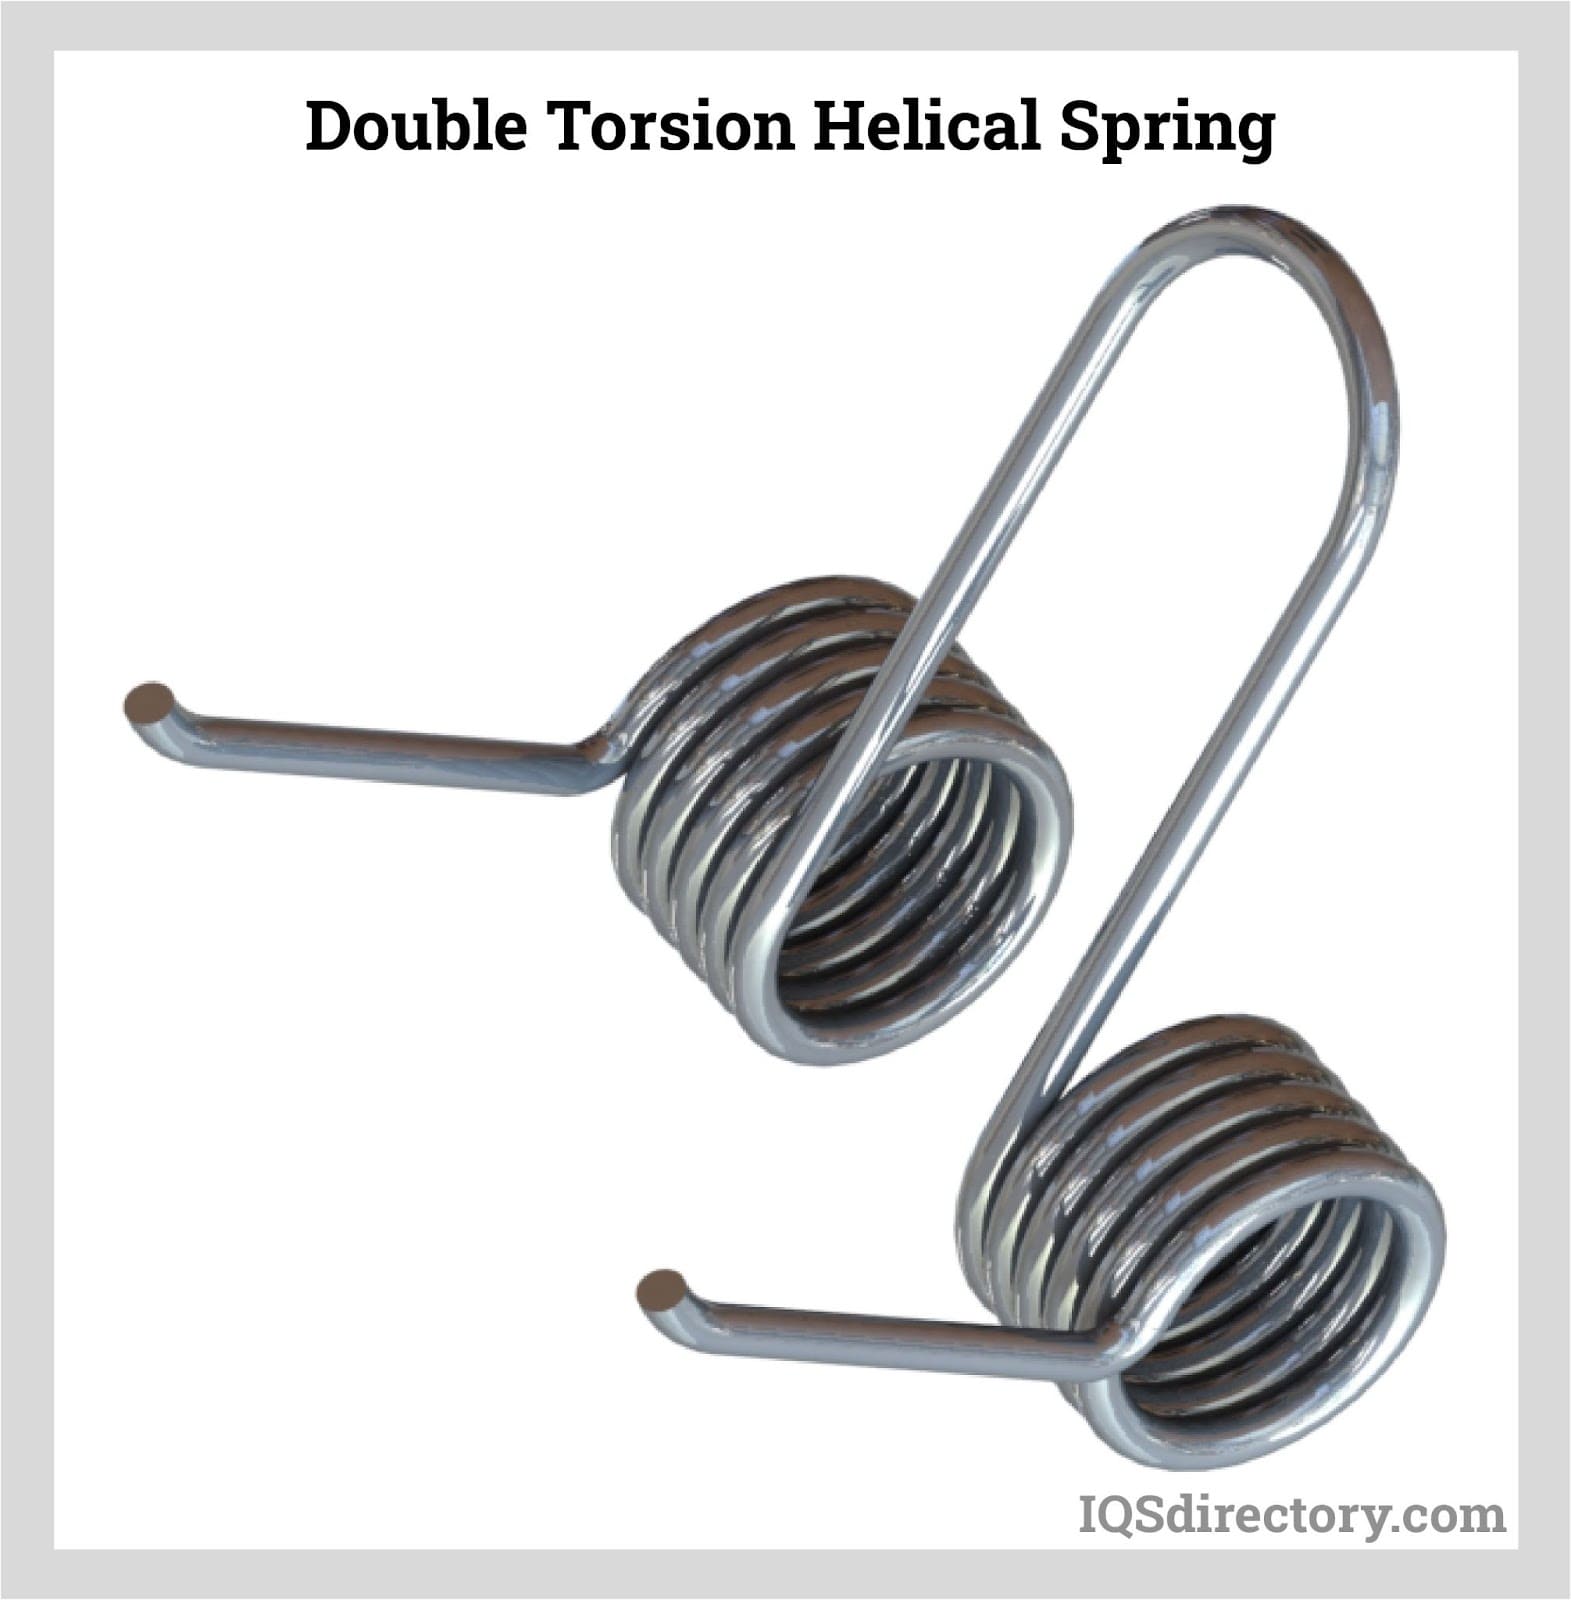 Double Torsion Helical Spring